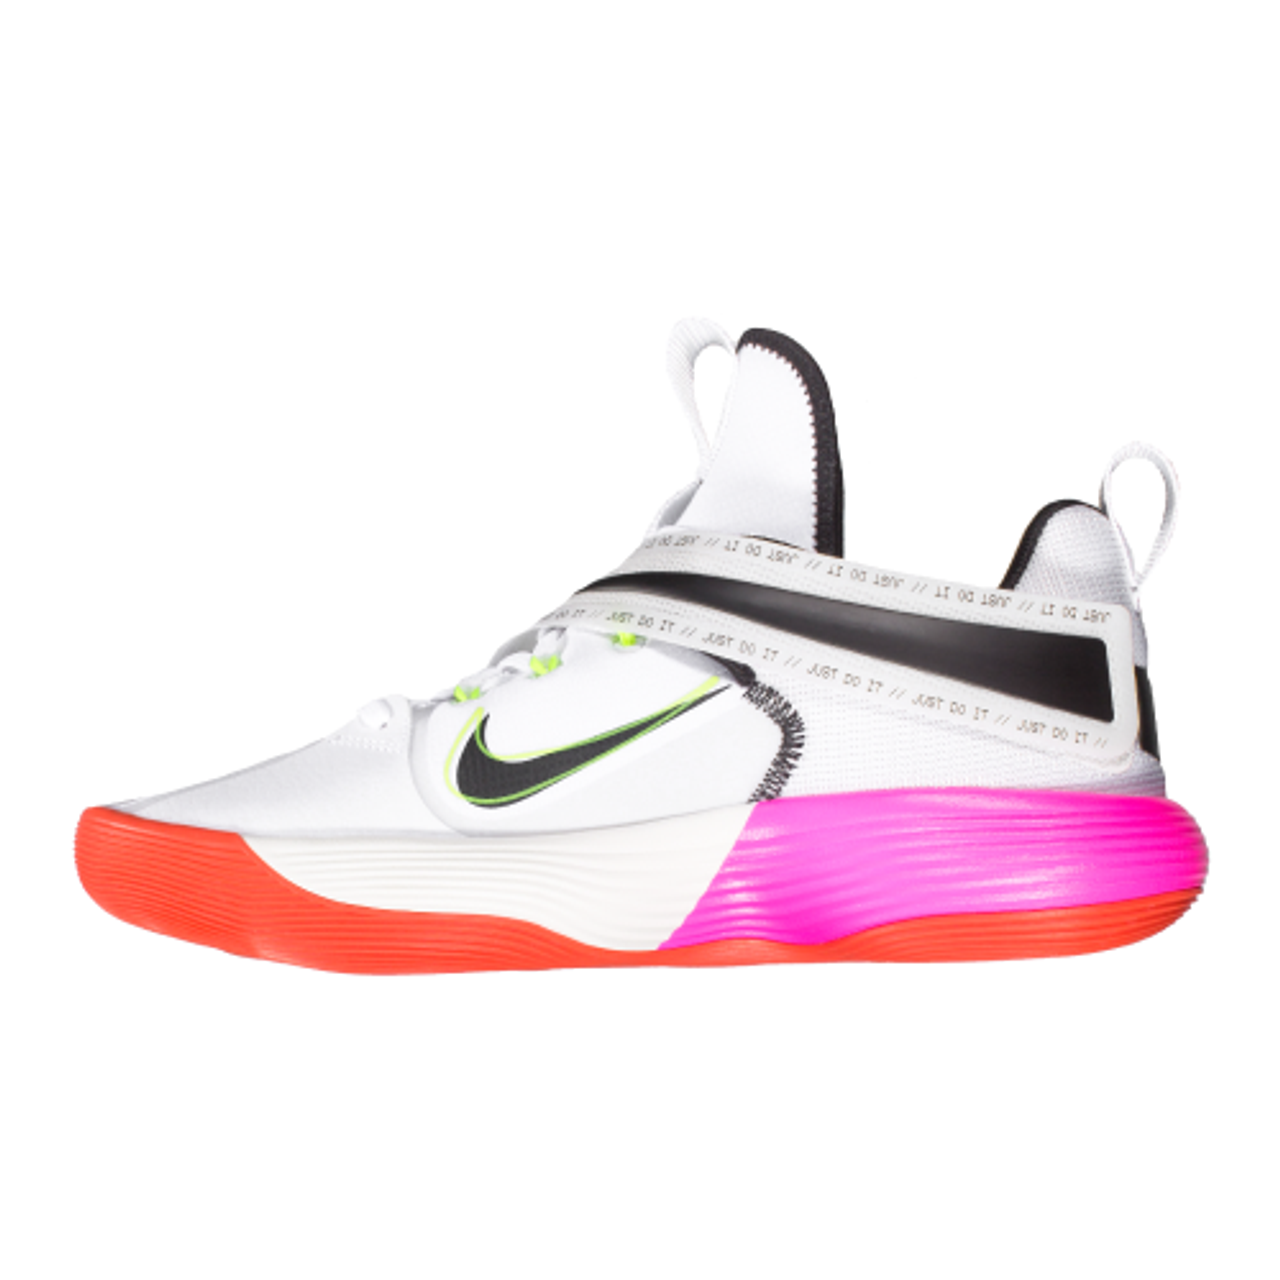 nike react hyperset volleyball shoes pink and blue